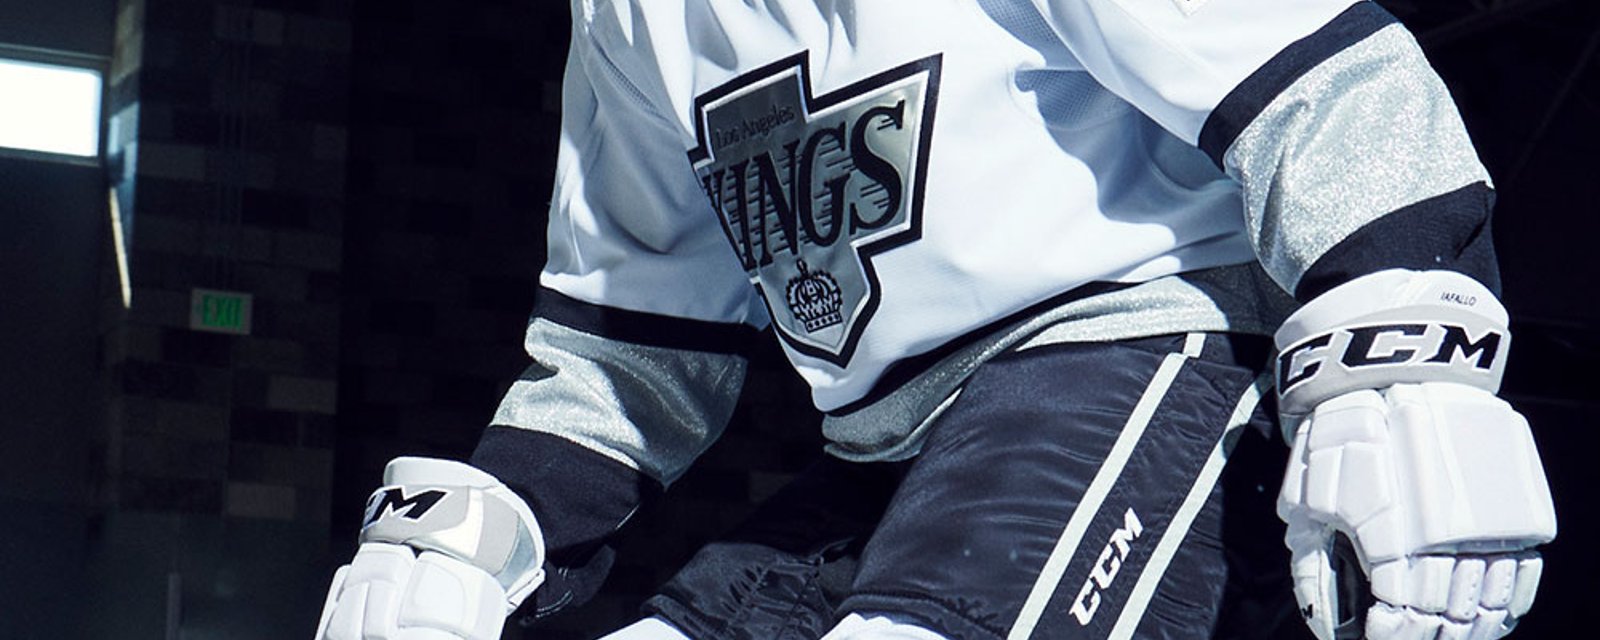 Kings introduce new uniforms featuring white gloves, chrome helmets and vintage logo